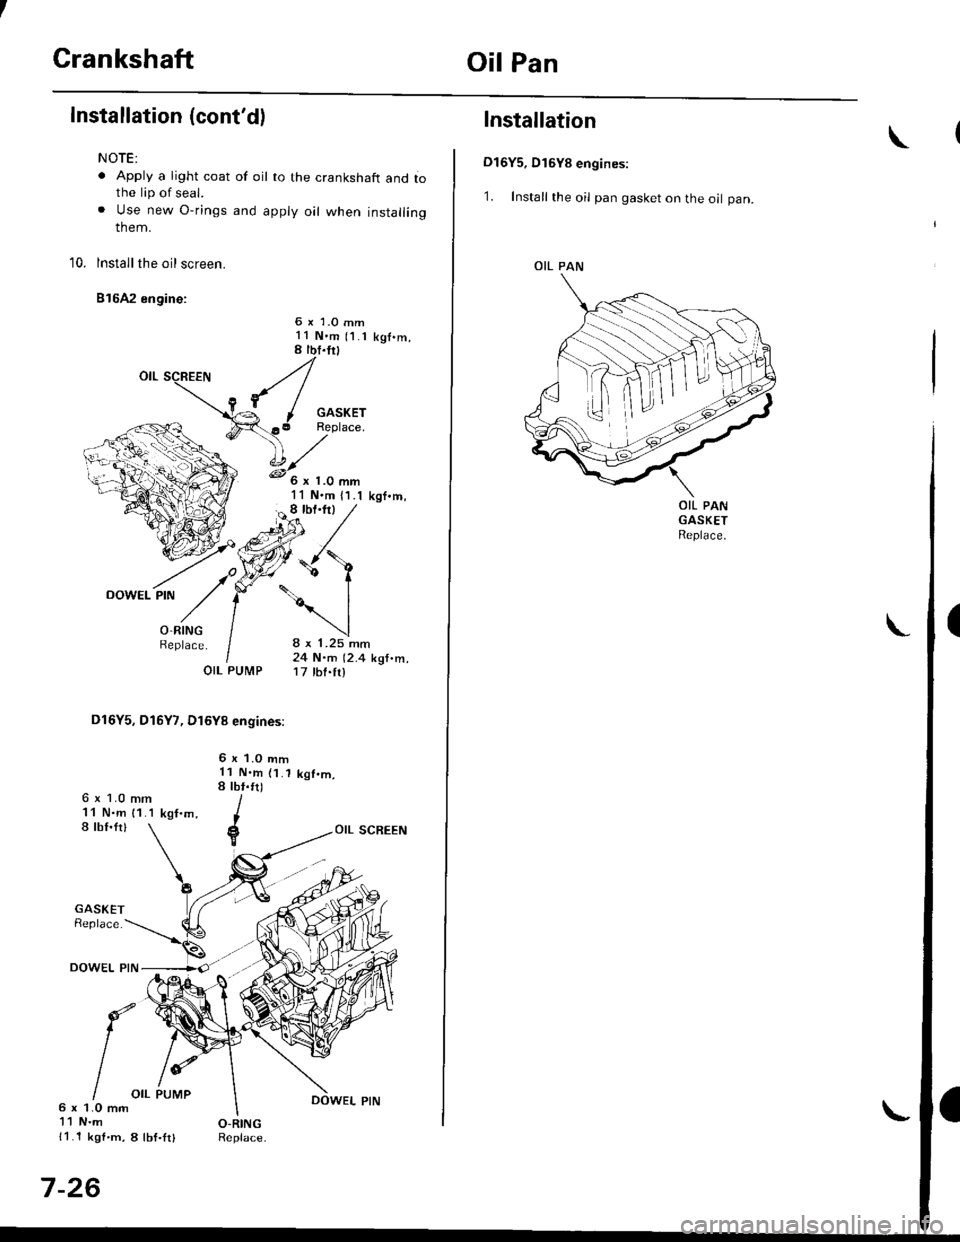 HONDA CIVIC 1996 6.G Workshop Manual CrankshaftOil Pan
Installation (contd)
NOTE:
. Apply a light coat of oil to the crankshaft and iothe lip of seal.. Use new O-rings and apply oil when installingthem.
10. lnstallthe oil screen.
816A2 